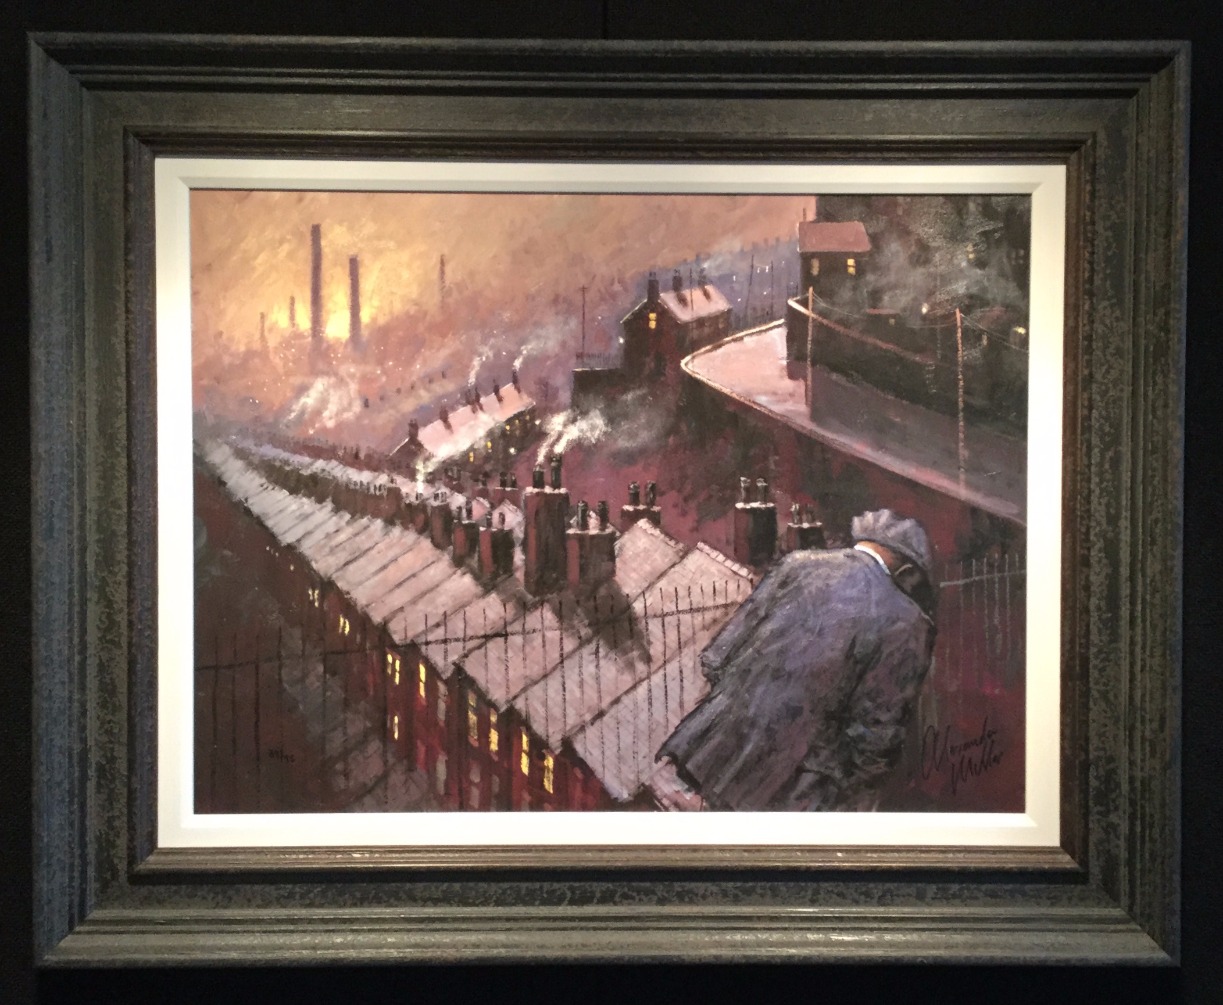 A Long and Winding Road by Alexander Millar